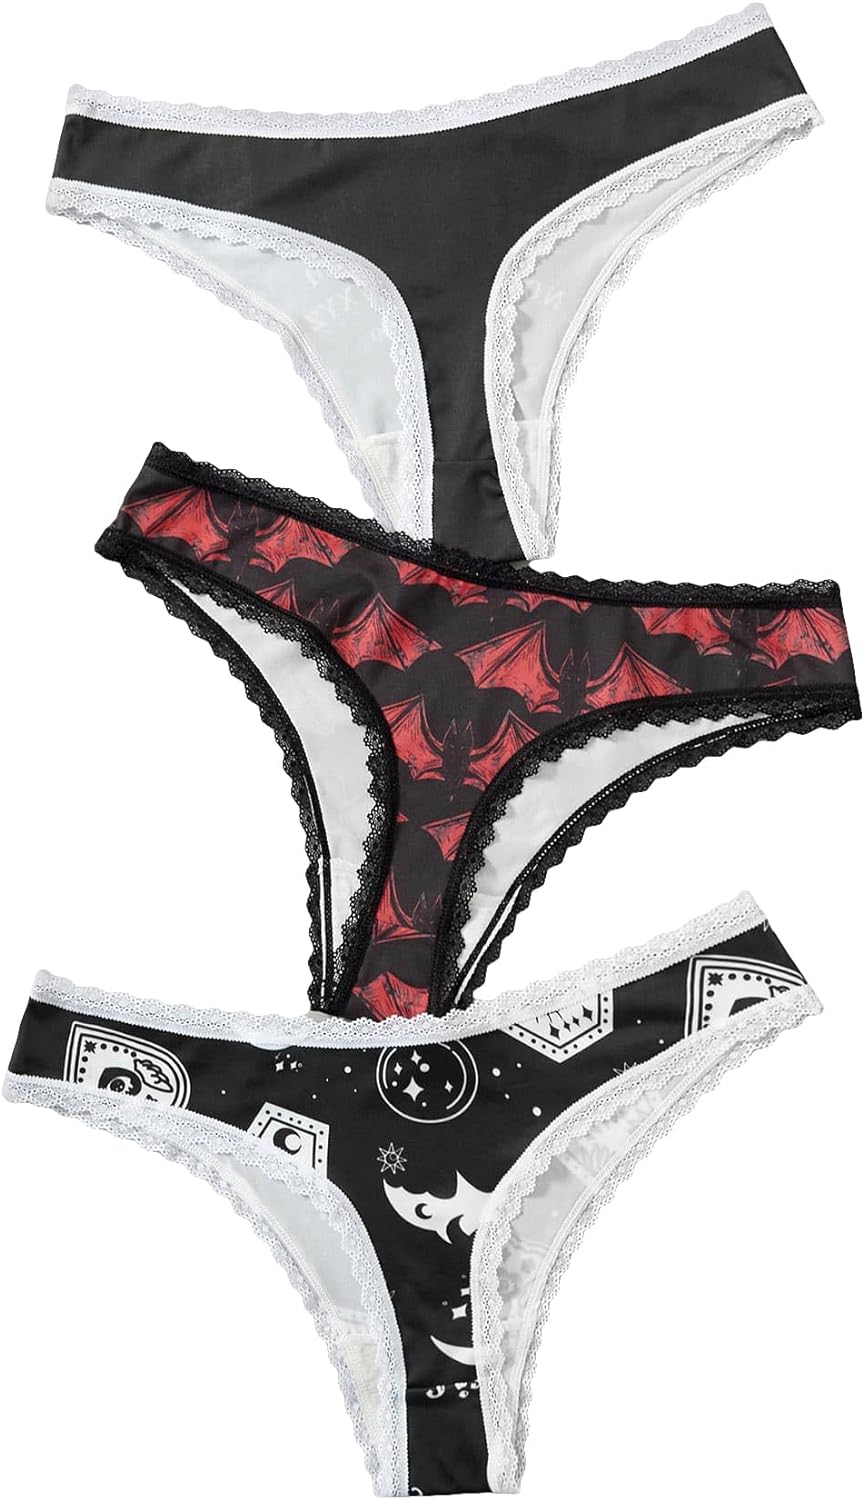  Womens 3 Pack Skull Graphic Print Lace Trim